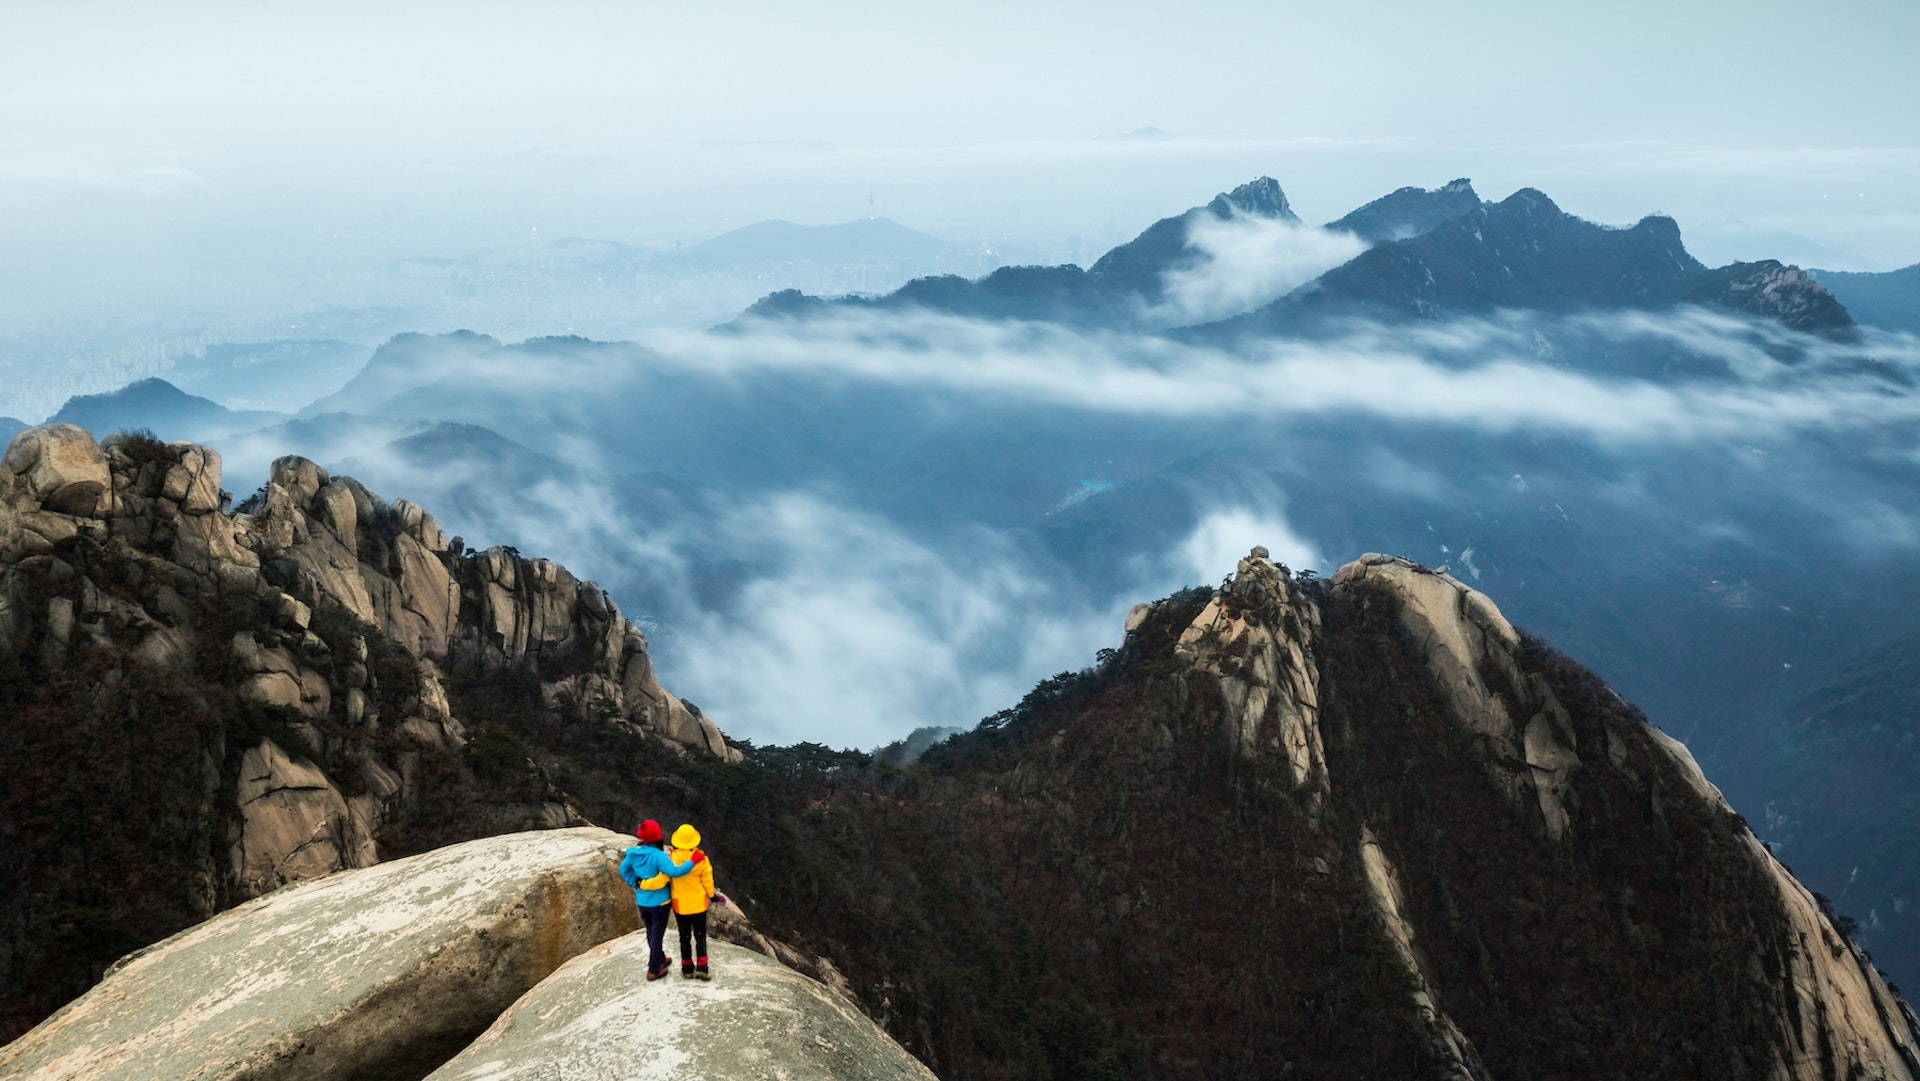 An aerial view of two hikers on a rocky outcrop overlooking cloudy mountain peaks a